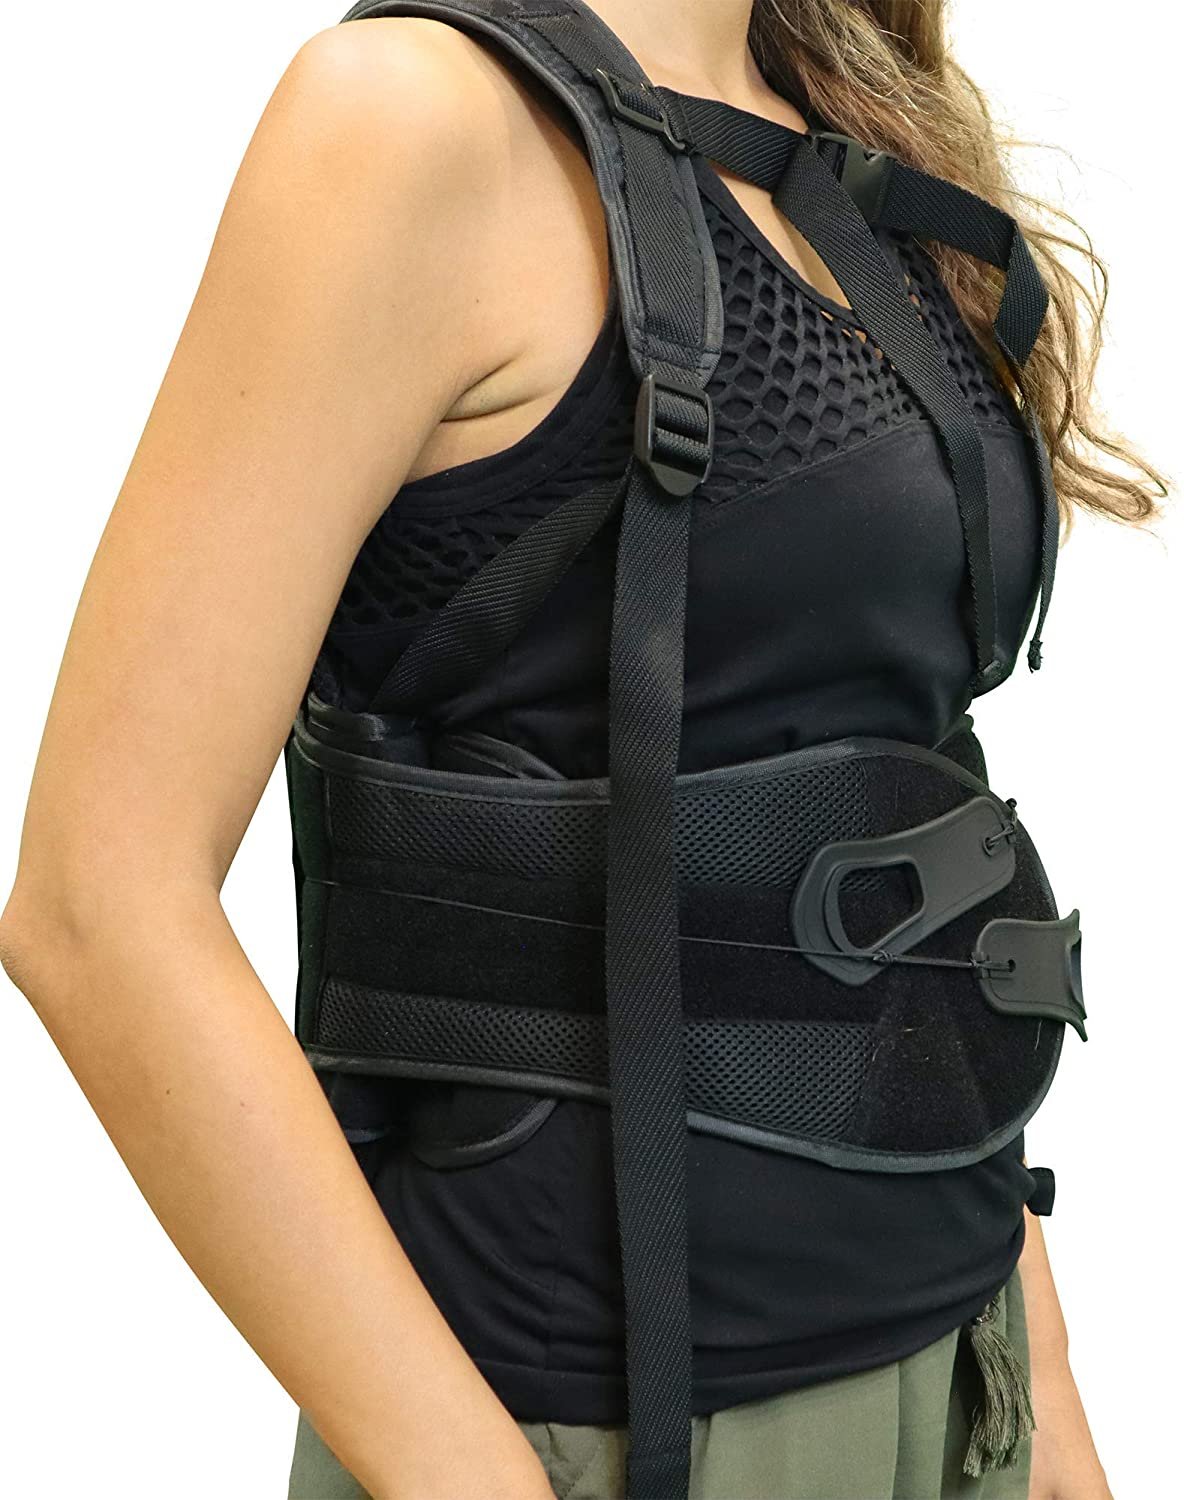 TLSO Thoracic Back Brace,Back Support and Back Pain Relief for